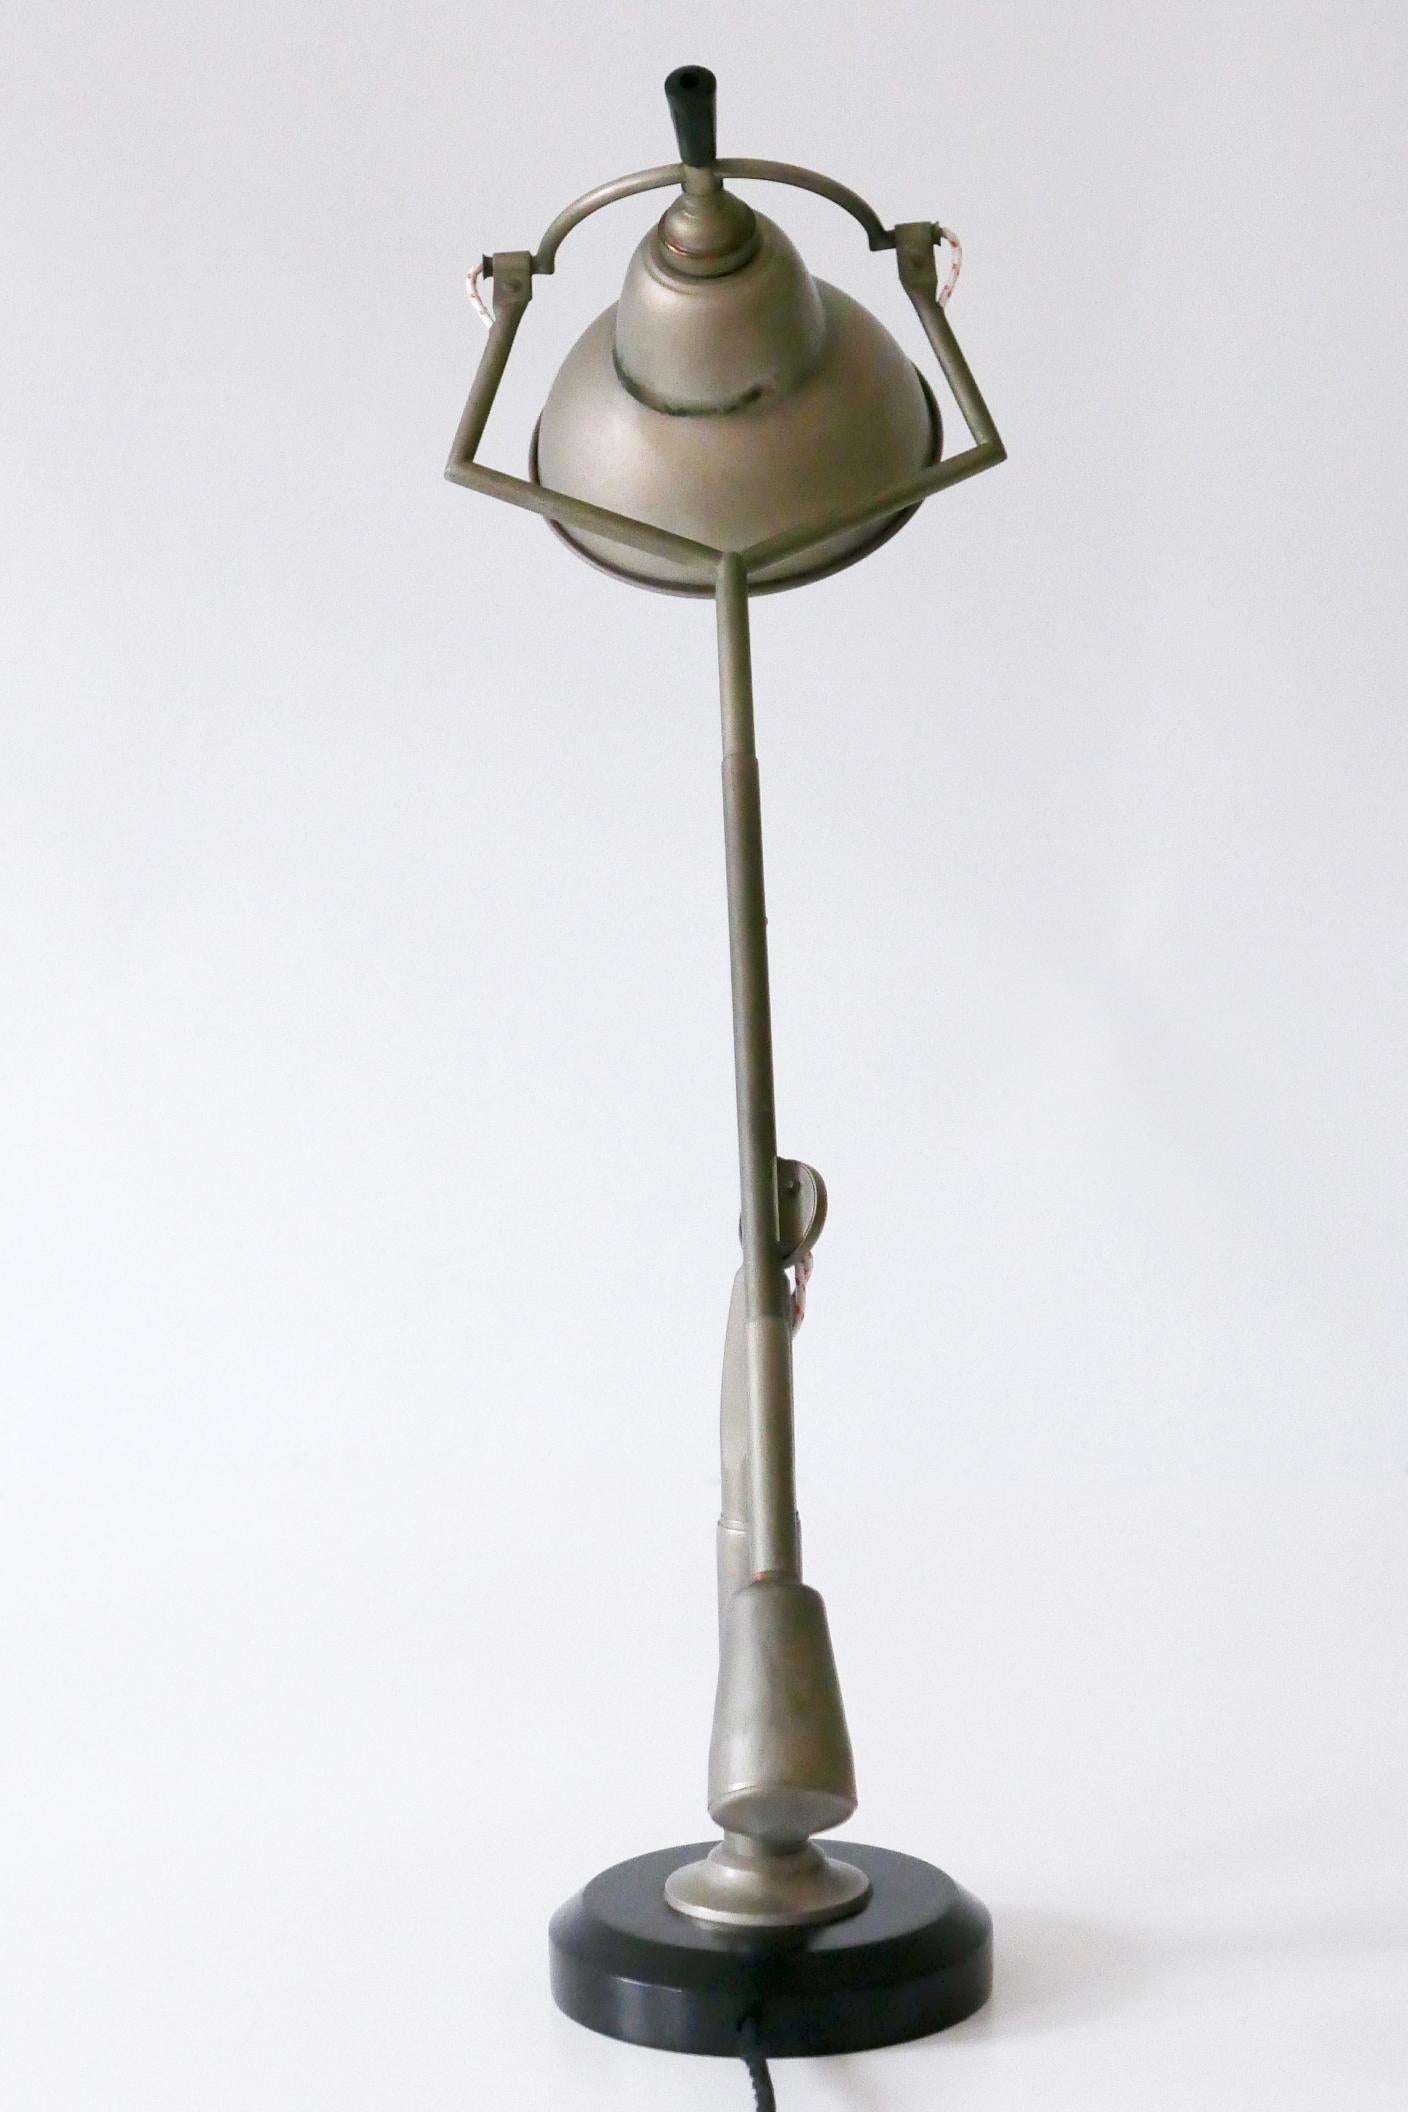 Modernist Counterbalance Table Lamp by Edouard-Wilfred Buquet, 1927, France For Sale 5